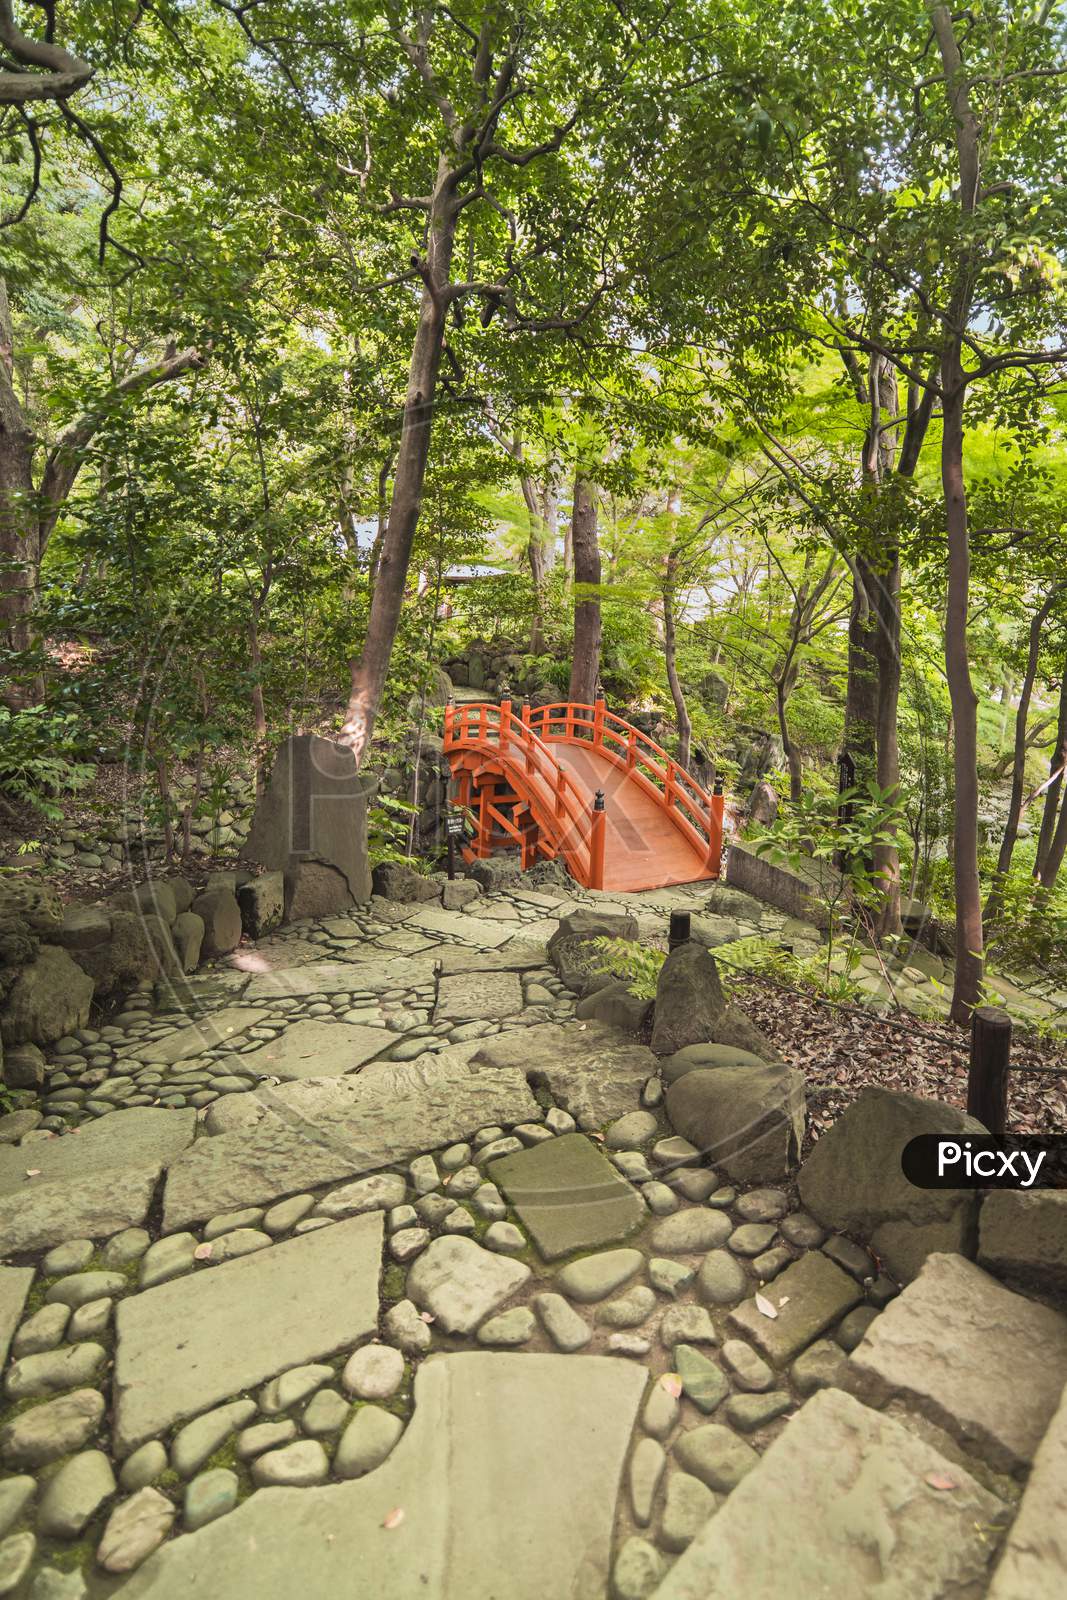 Spiral Staircase Paved With Stones And Pebbles Leading To The Japanese Vermilion Tsuten Bridge Surrounded By Maples And Cherry Trees In The Forest Of Koishikawa Korakuen Park.